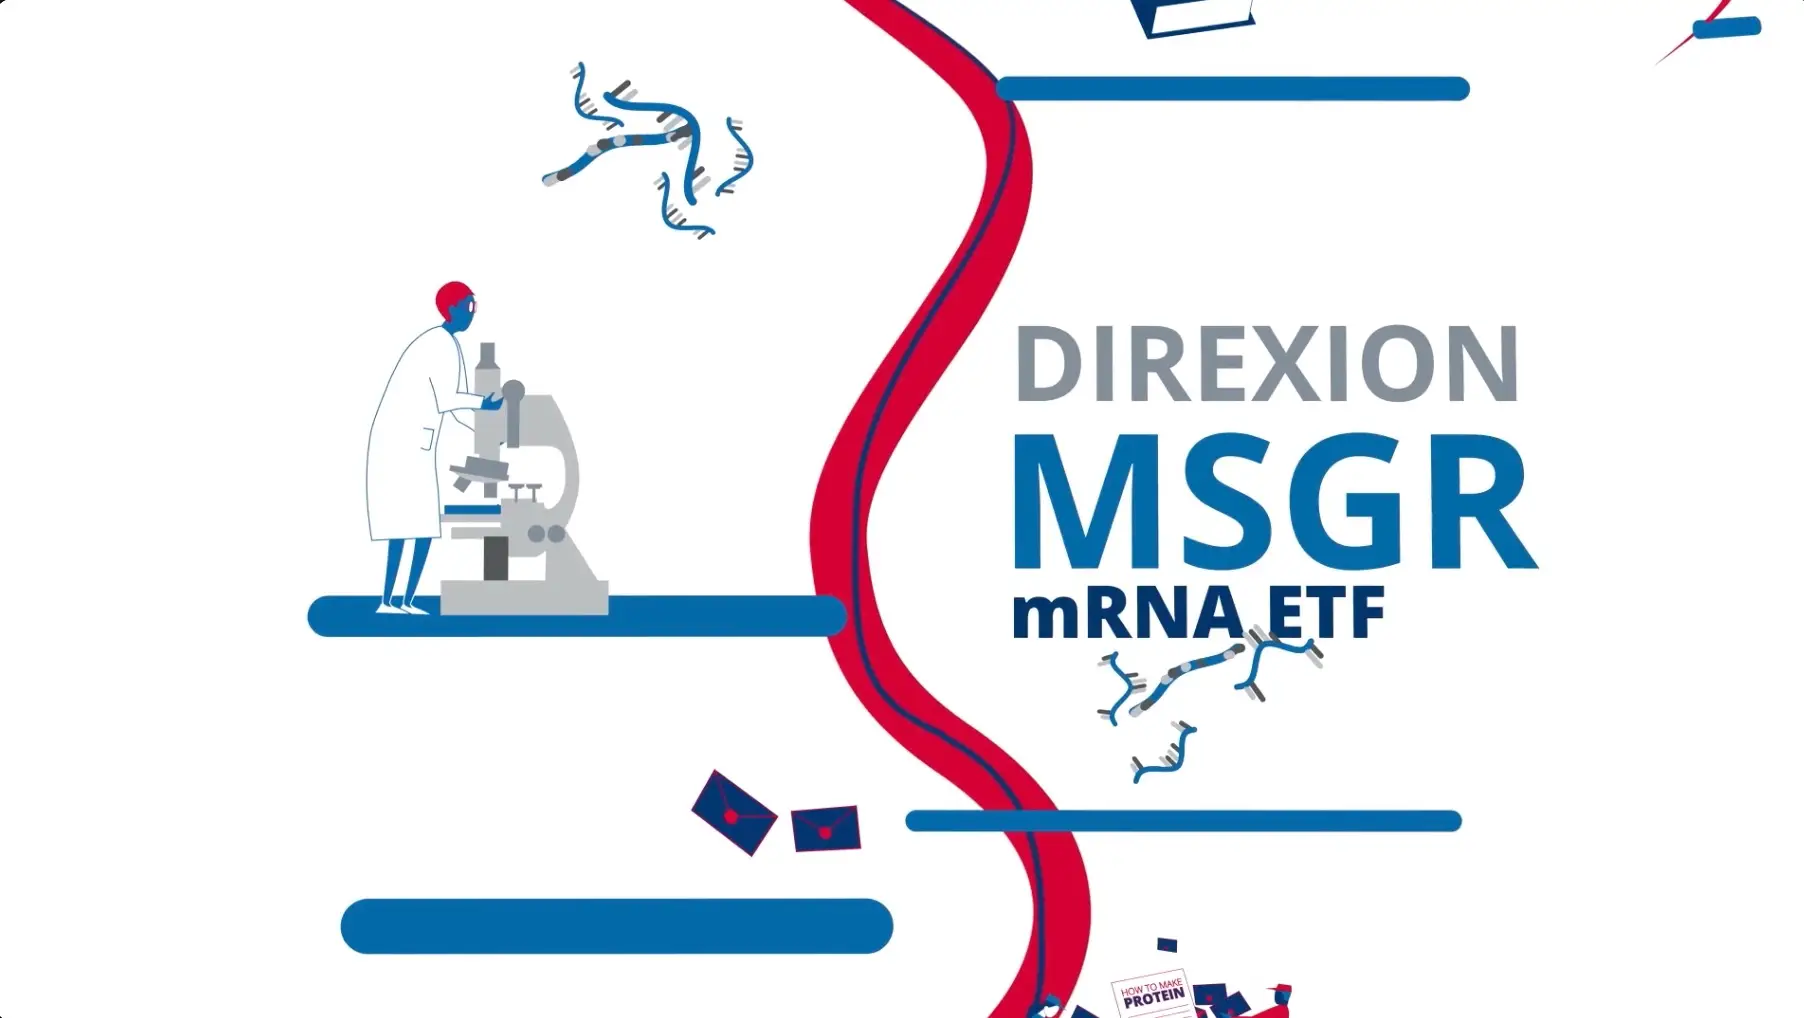 The logo for Direxion MSGR MNA ETF, tailored for SEO Client Case Study.